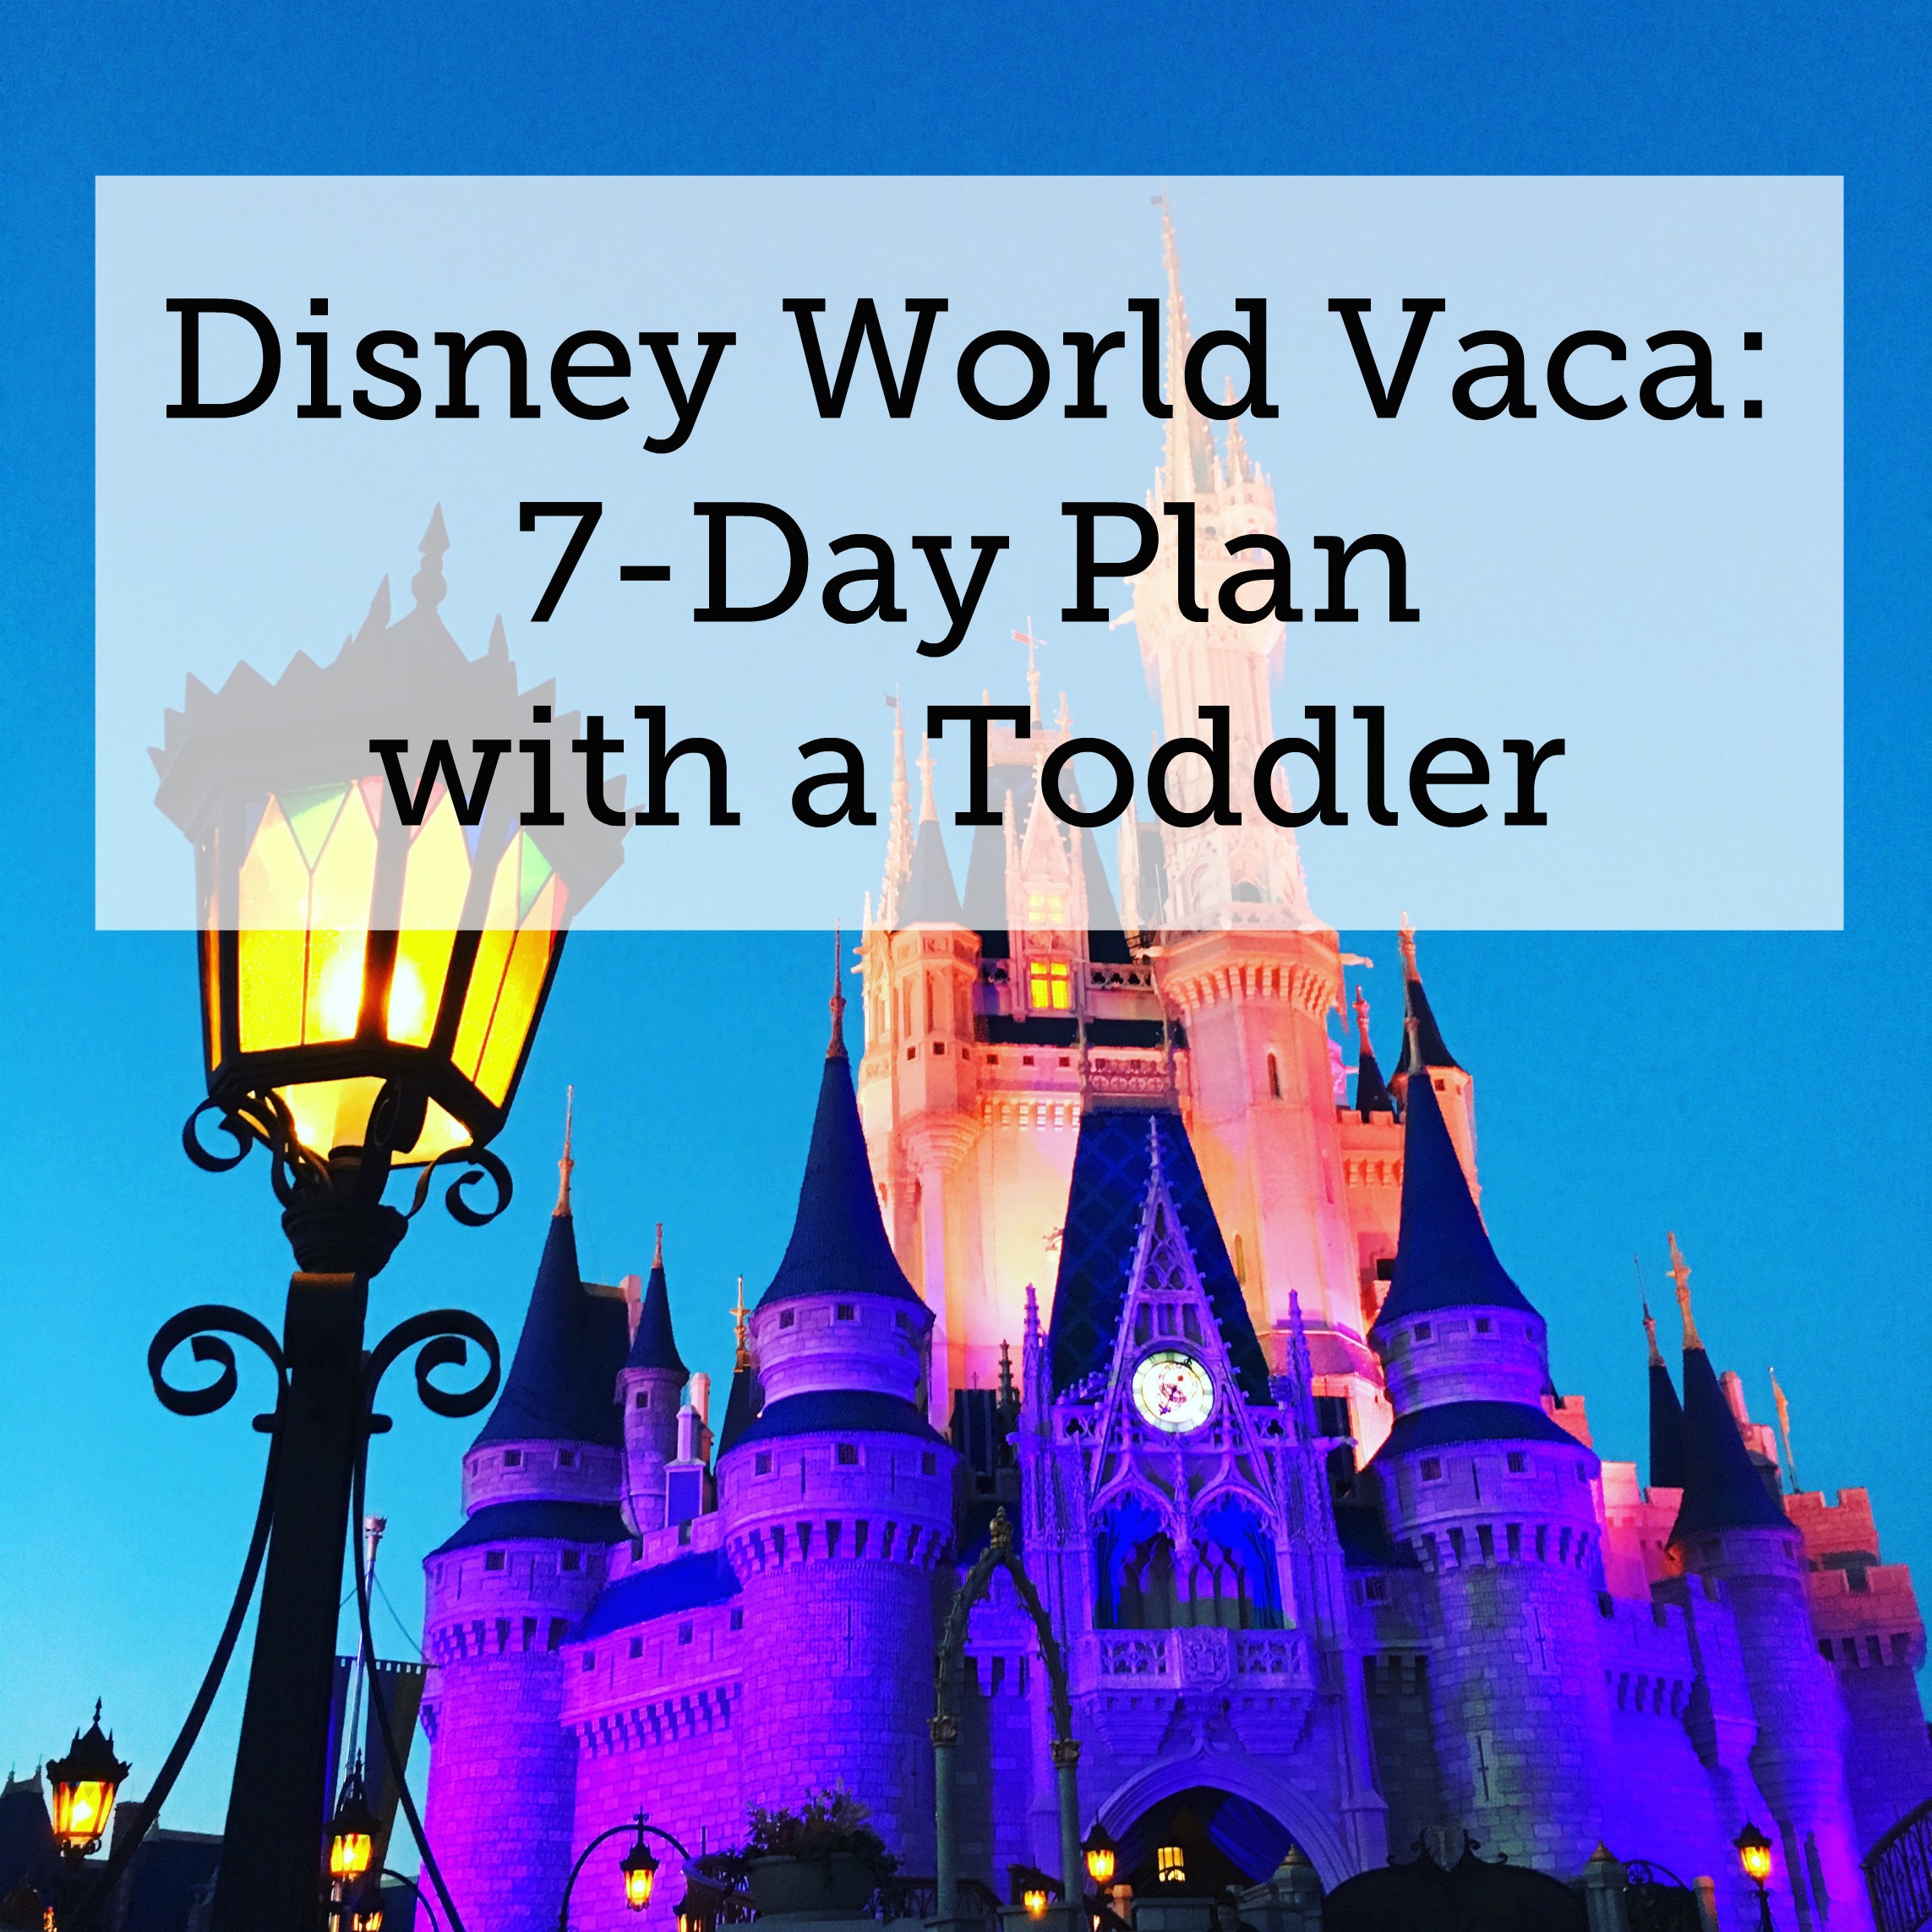 Disney World 2019: 7-Day Plan with a Toddler